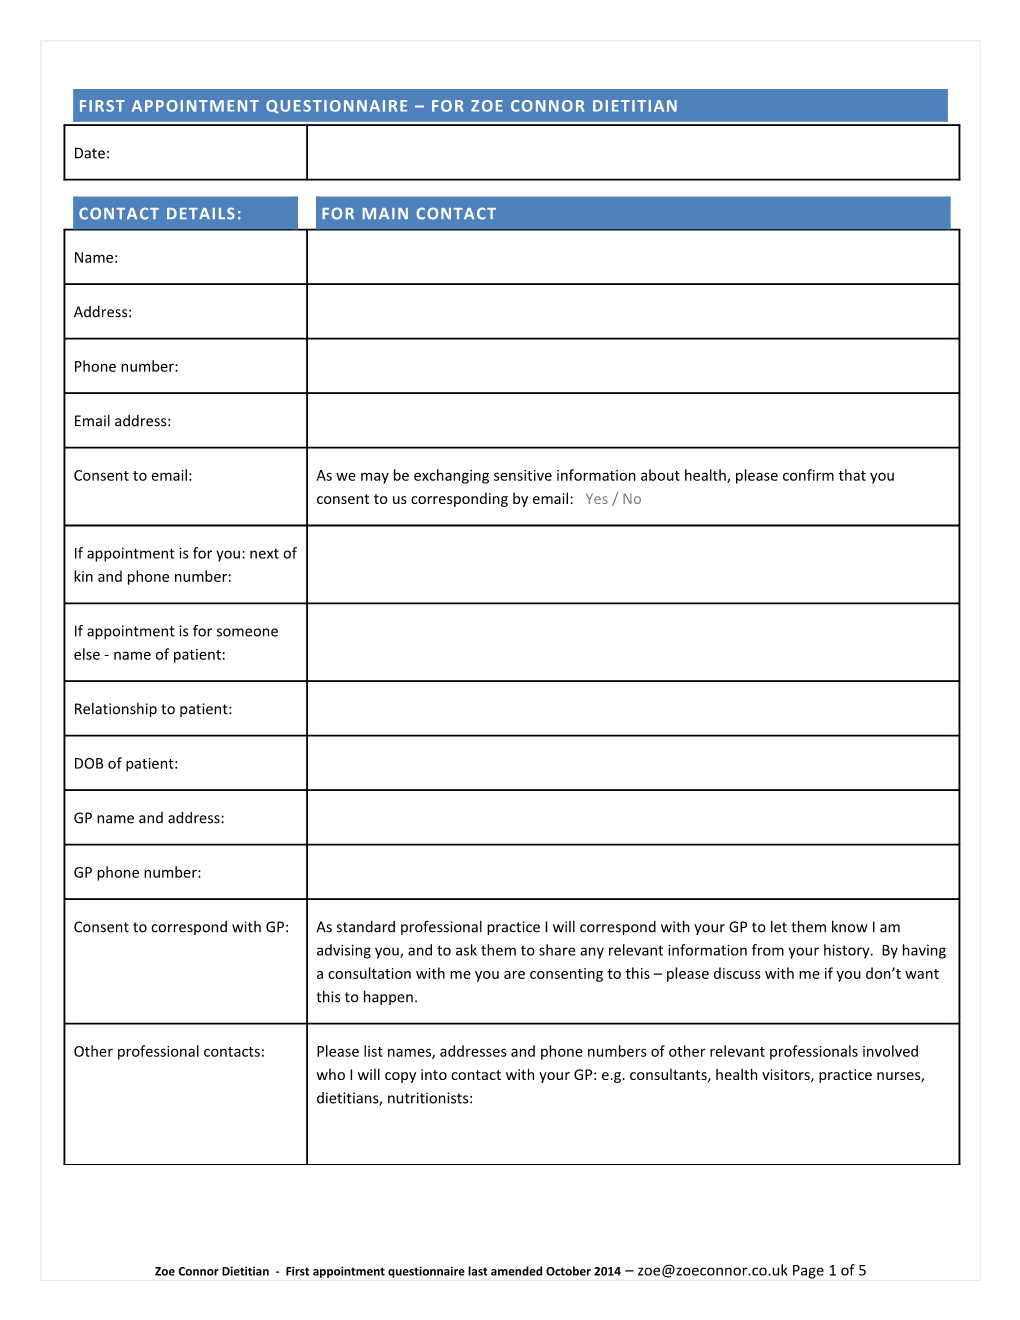 First Appointment Questionnaire for Zoe Connor Dietitian